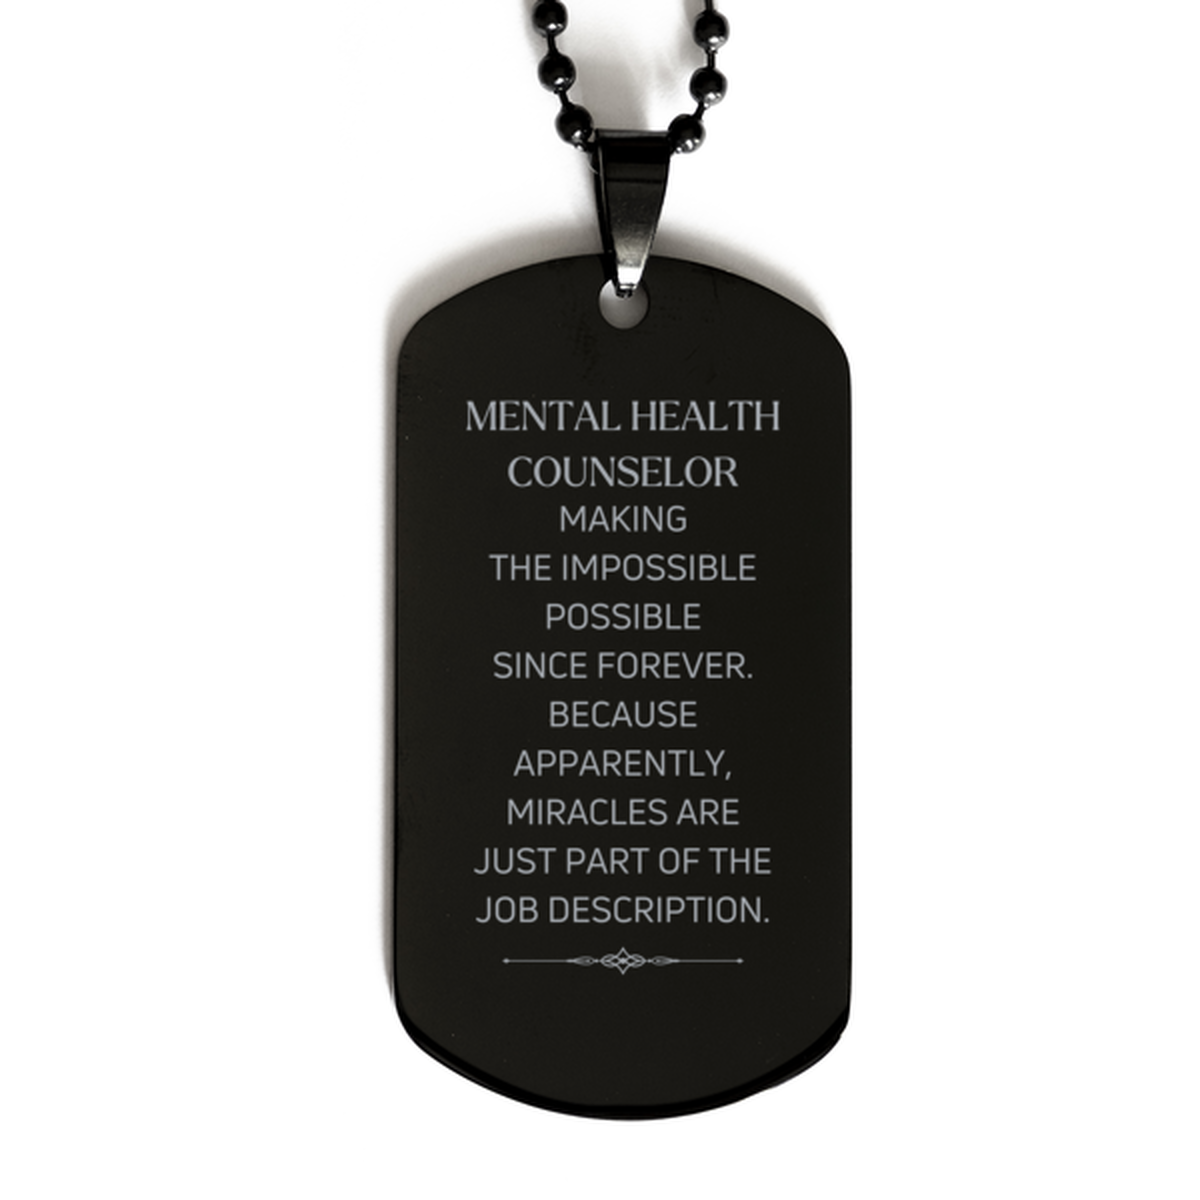 Funny Mental Health Counselor Gifts, Miracles are just part of the job description, Inspirational Birthday Black Dog Tag For Mental Health Counselor, Men, Women, Coworkers, Friends, Boss